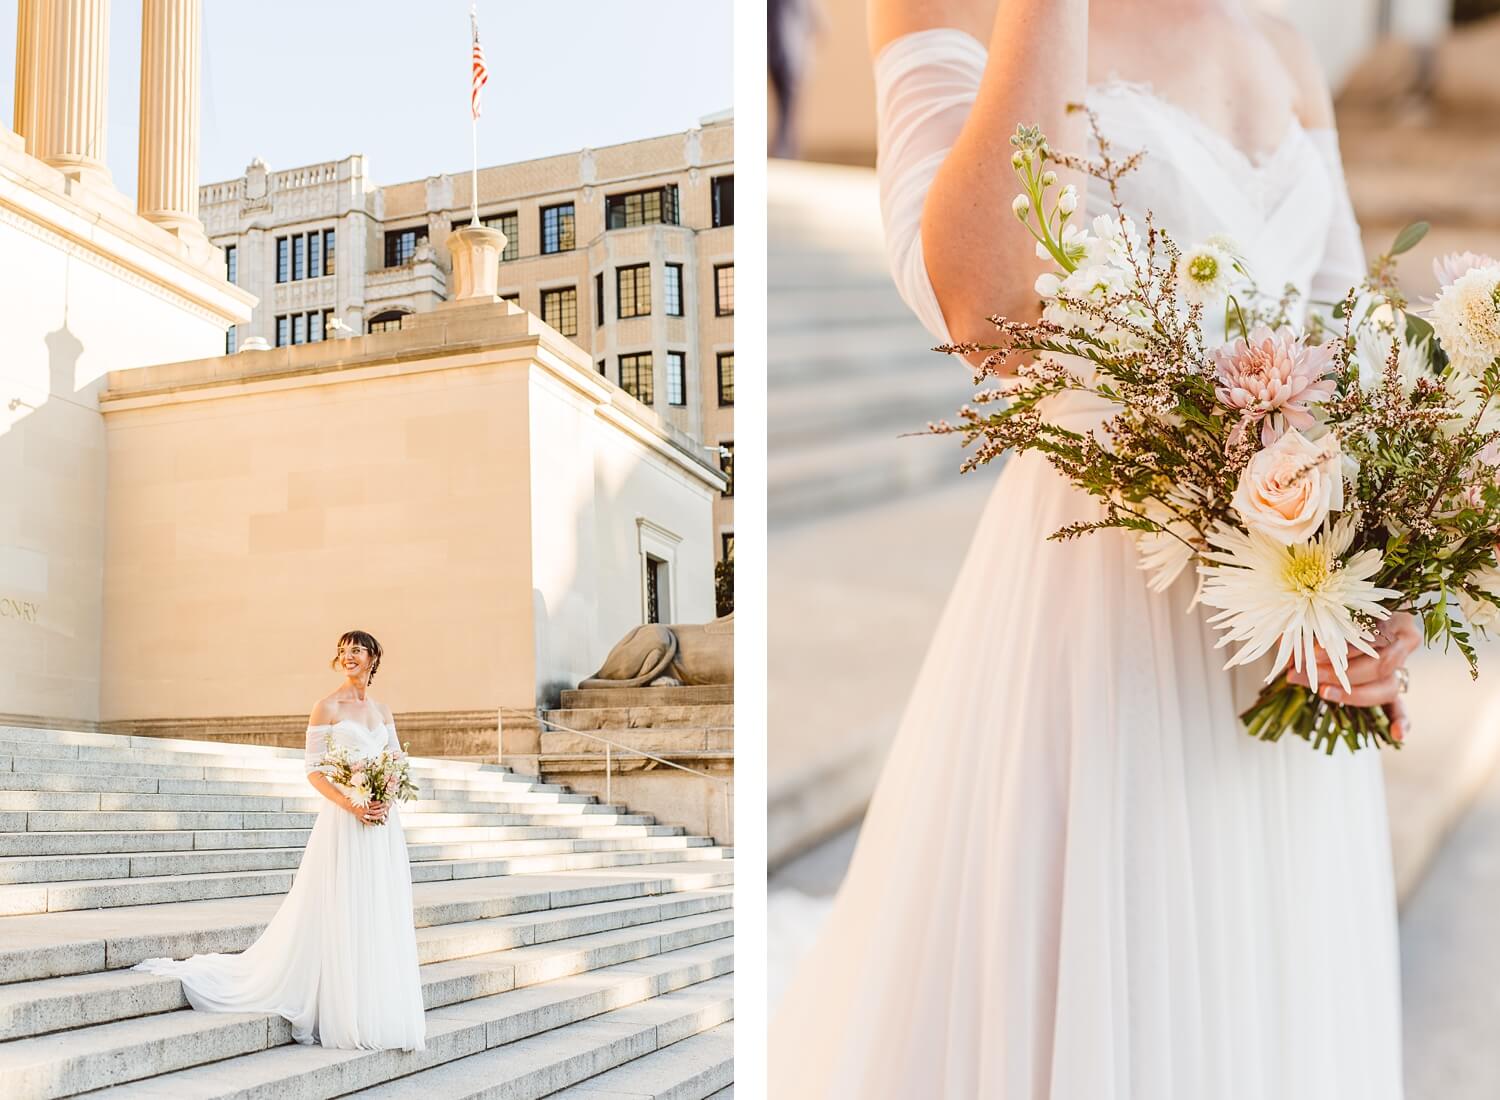 Bride standing on stairs holding bouquet | bride's bouquet full of white and pink flowers | Brooke Michelle Photography